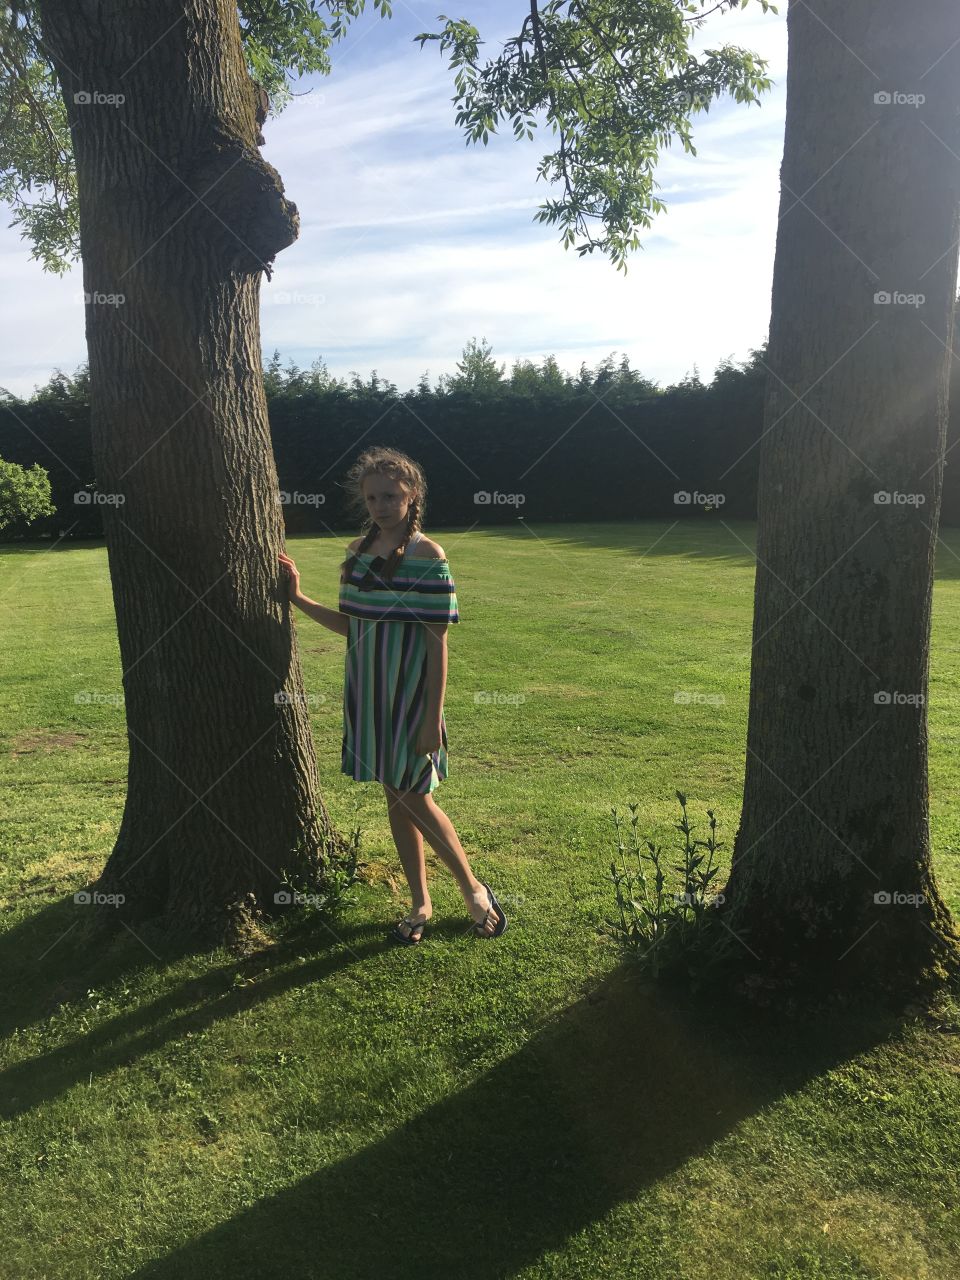 My beautiful daughter at the winters barn gardens between 2 trees in the sunshine in May 